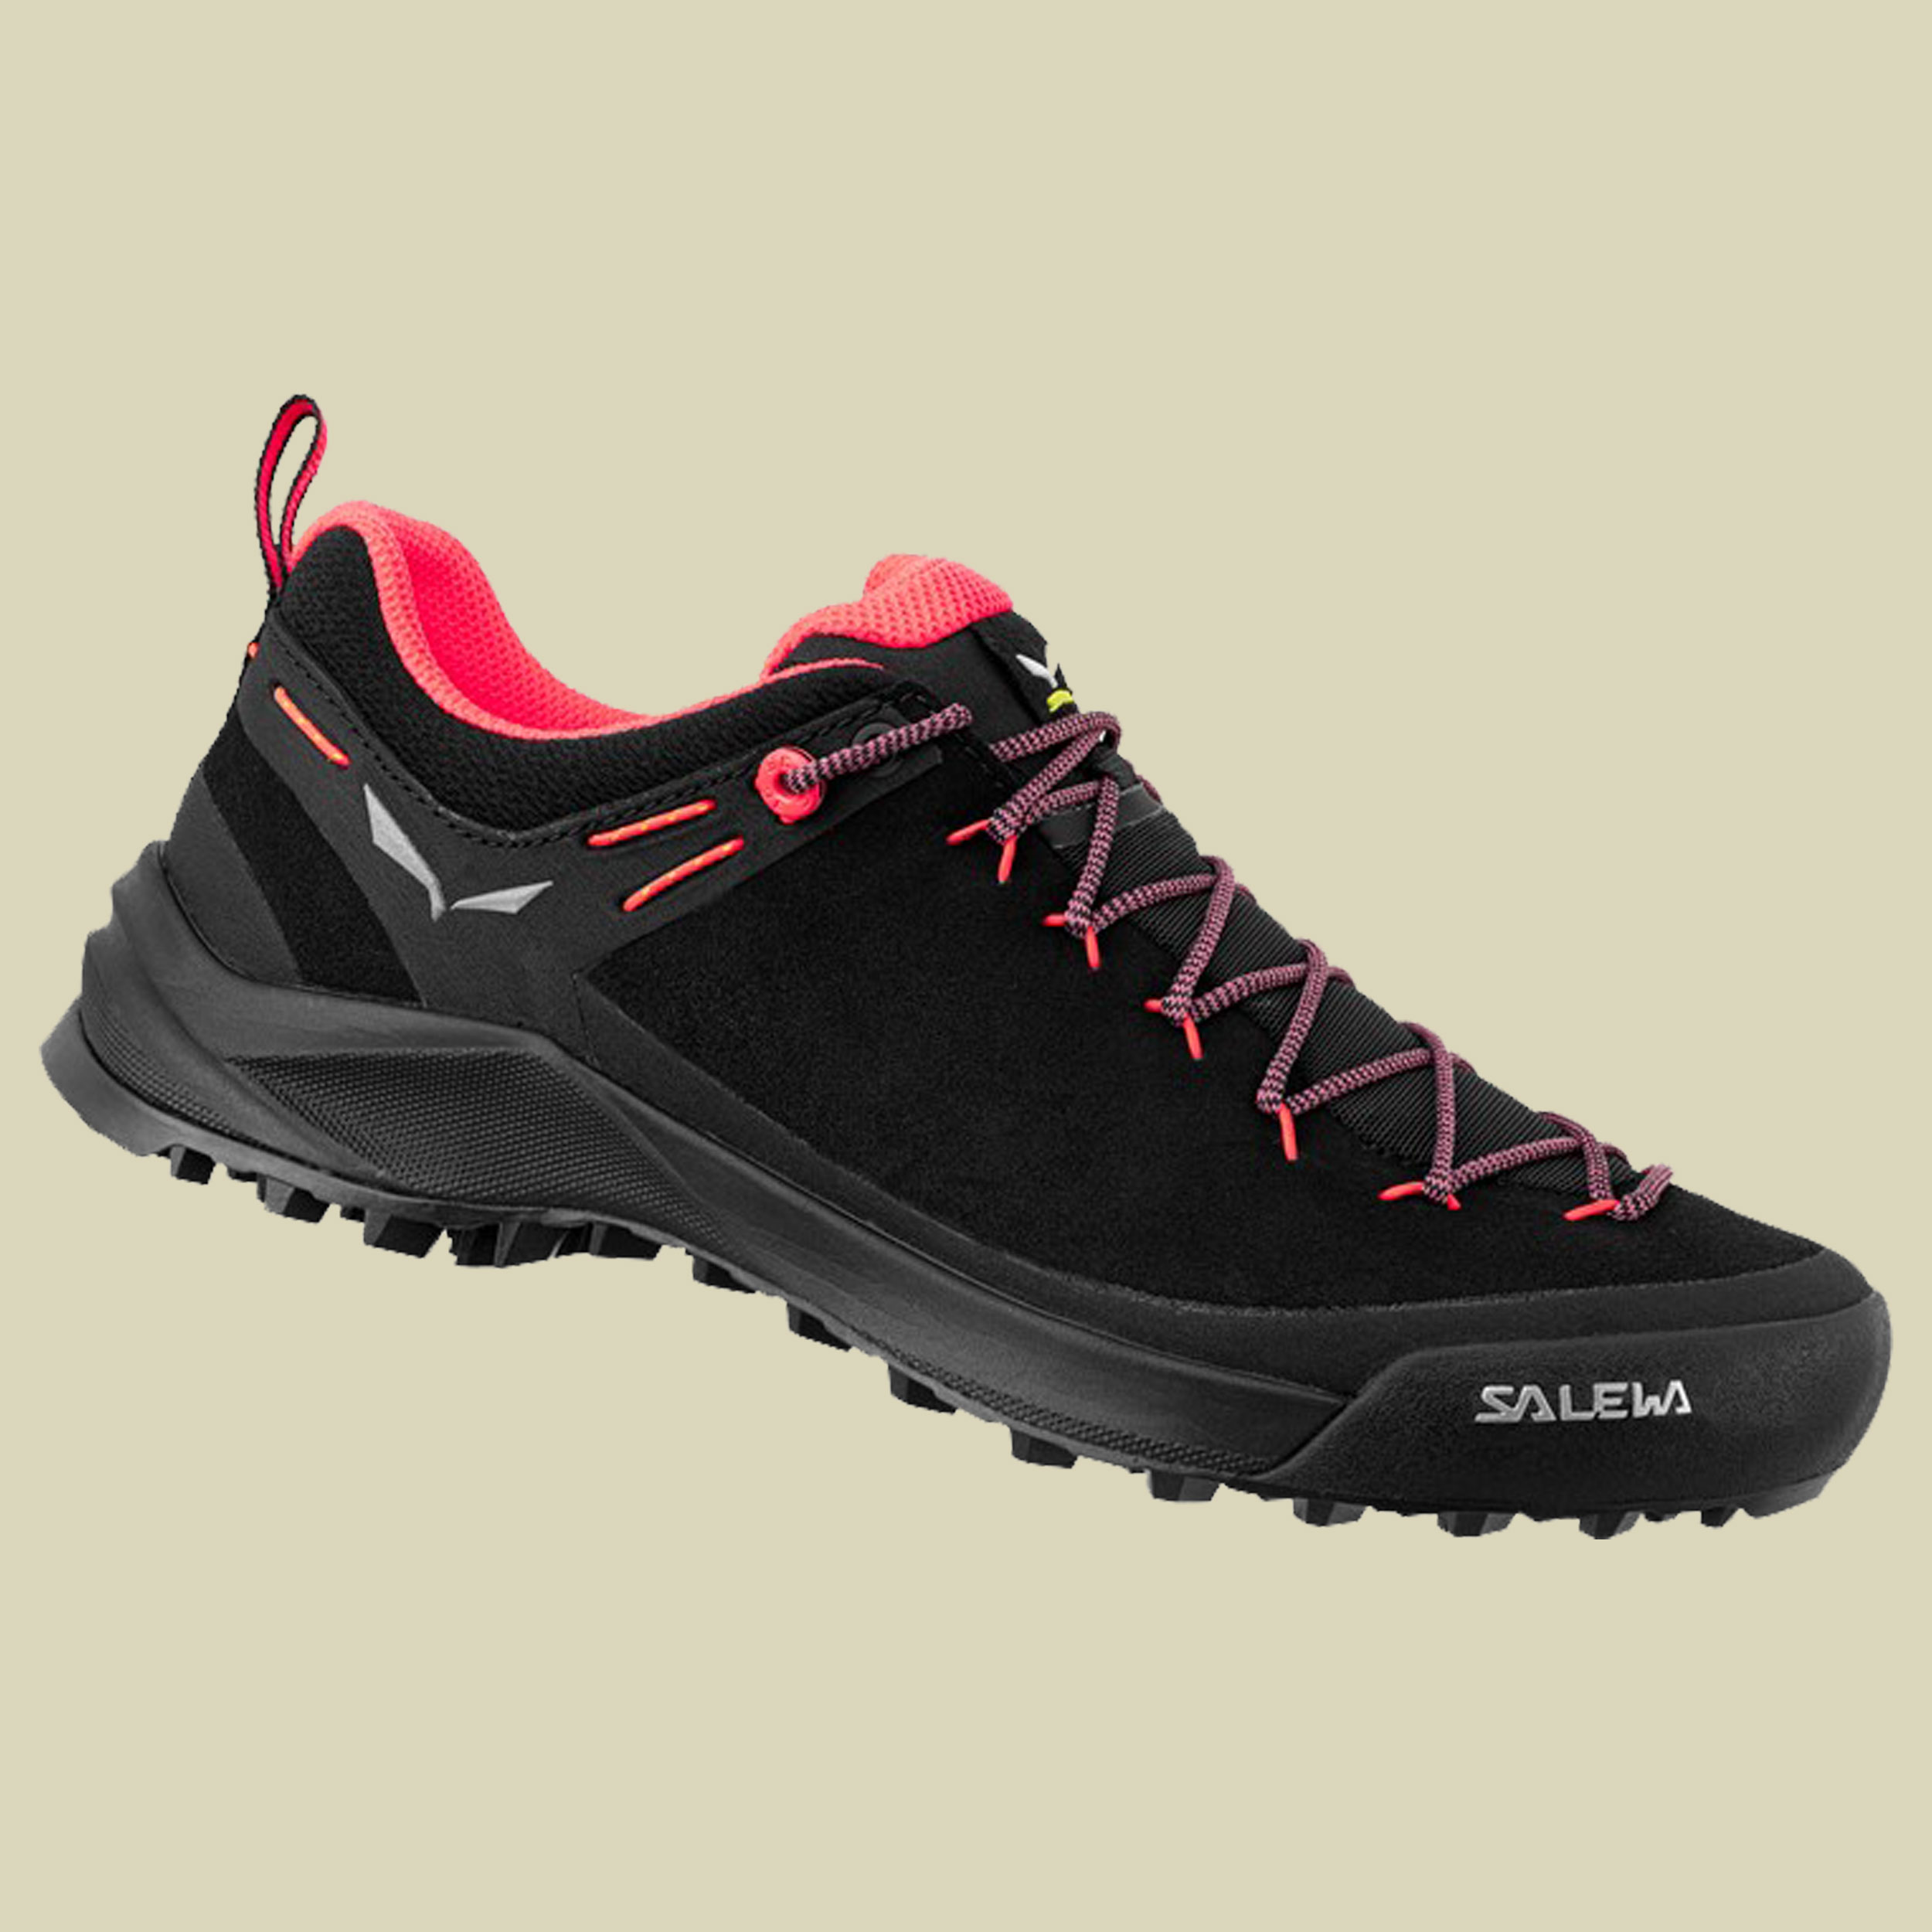 WS Wildfire Leather Größe UK 8 Farbe black/fluo coral